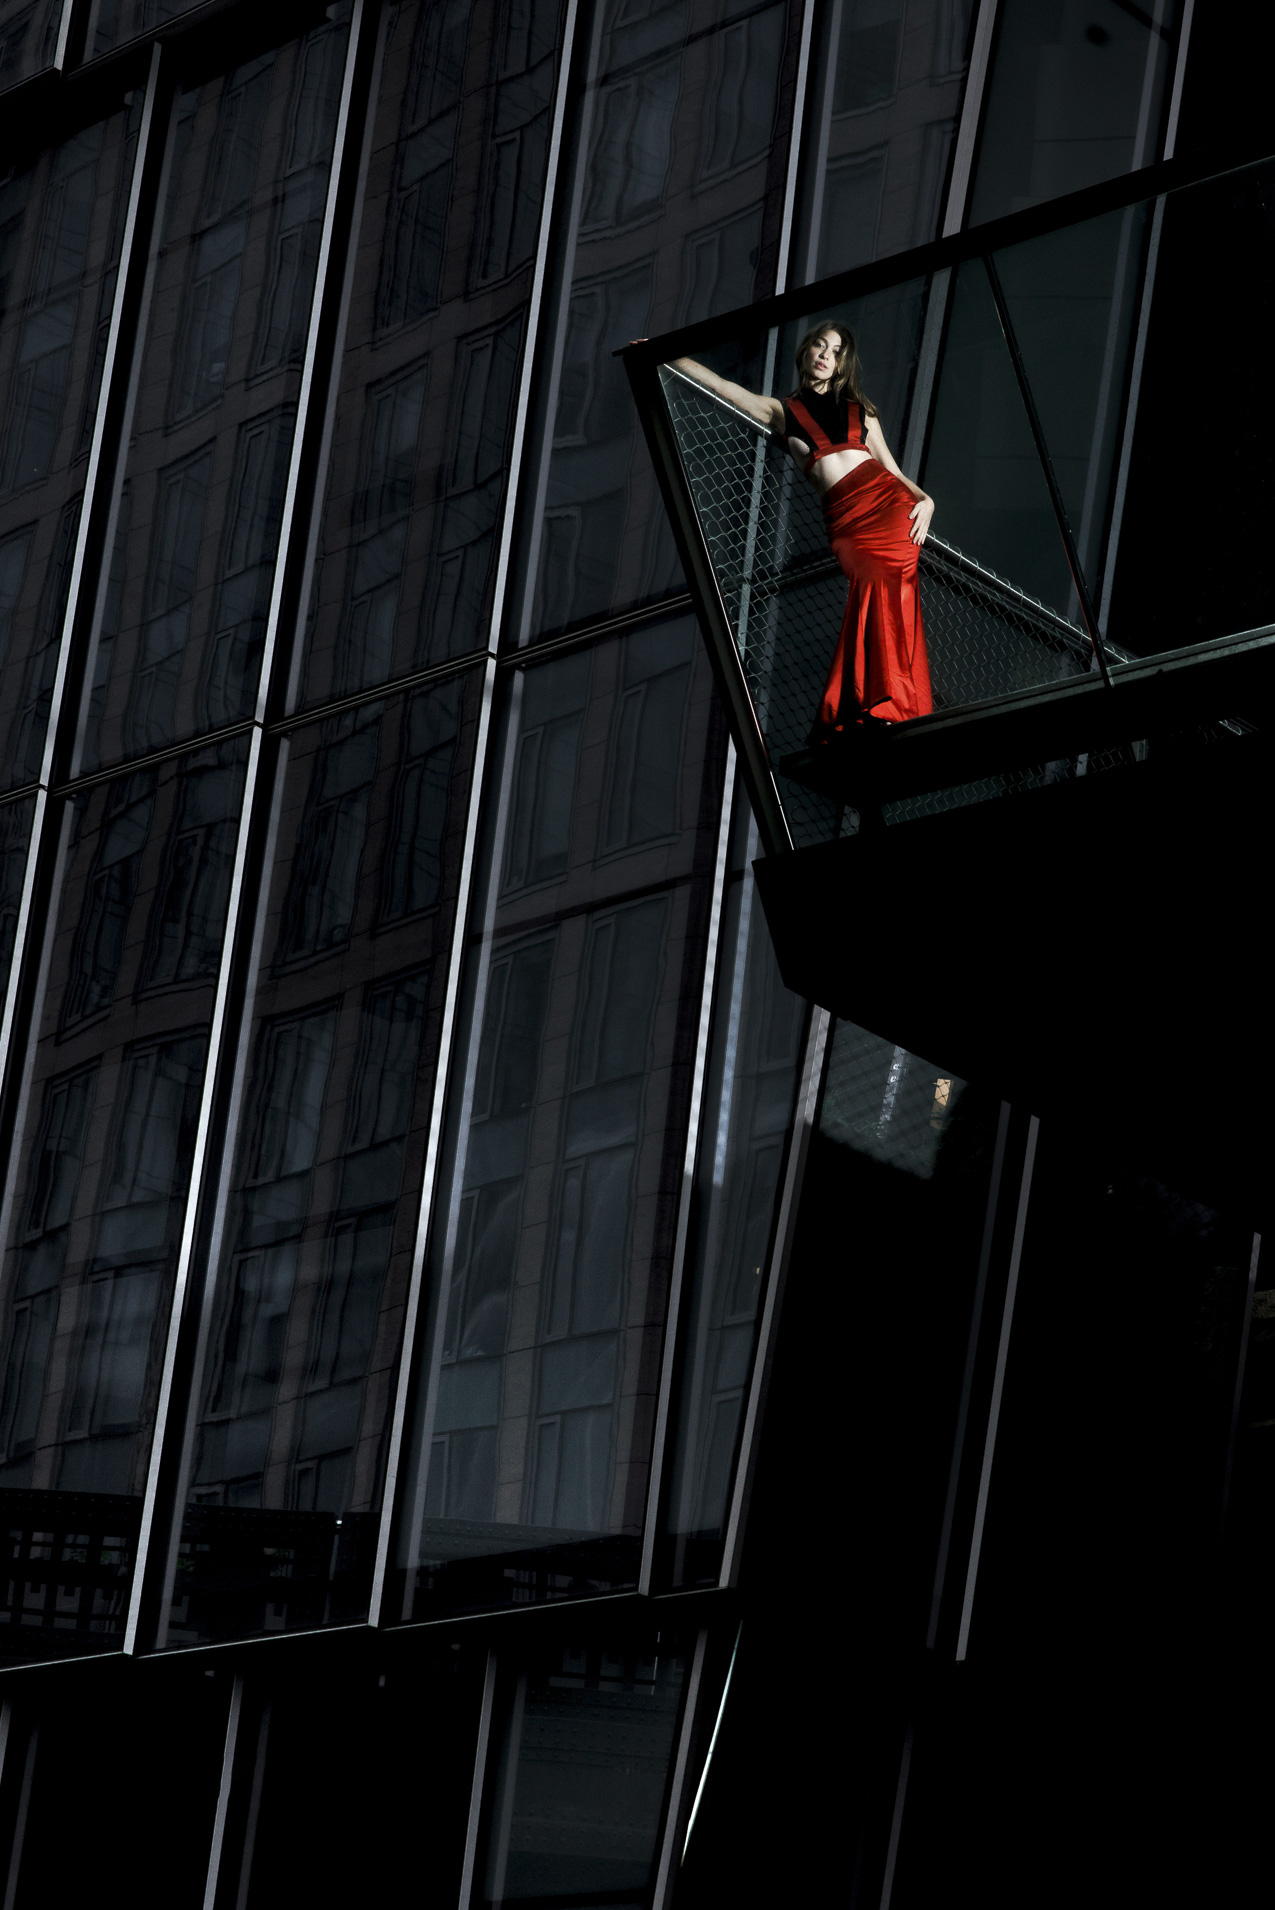 A woman standing outside in a red dress